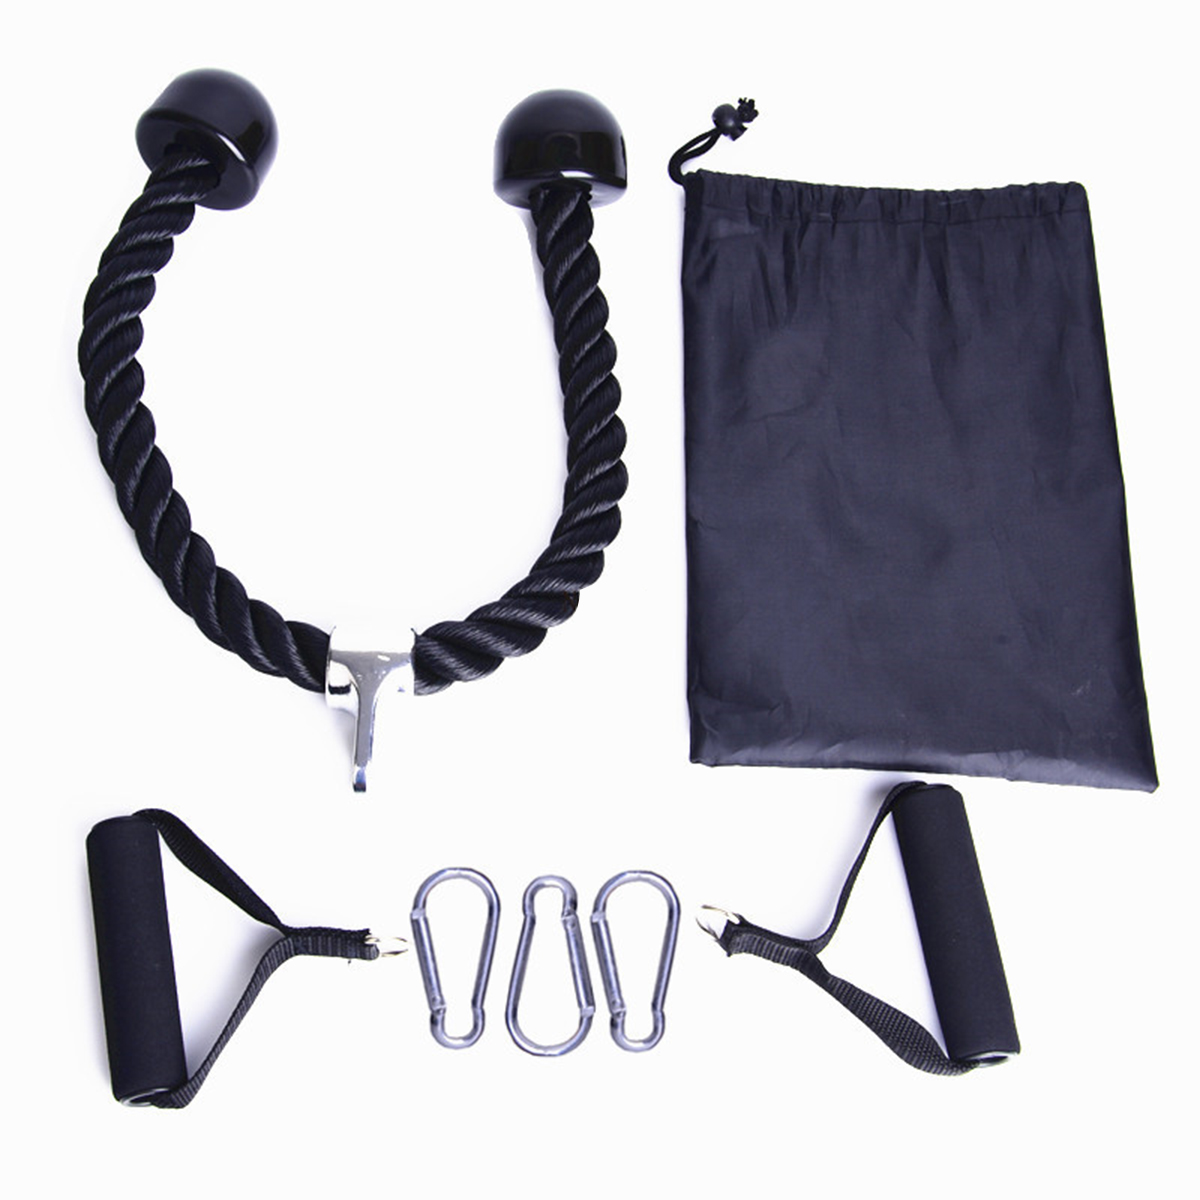 7PCSSET-Tricep-Bicep-Pull-Rope-Cable-Muscle-Strength-Training-Attachment-Home-Gym-Exercise-1851395-7